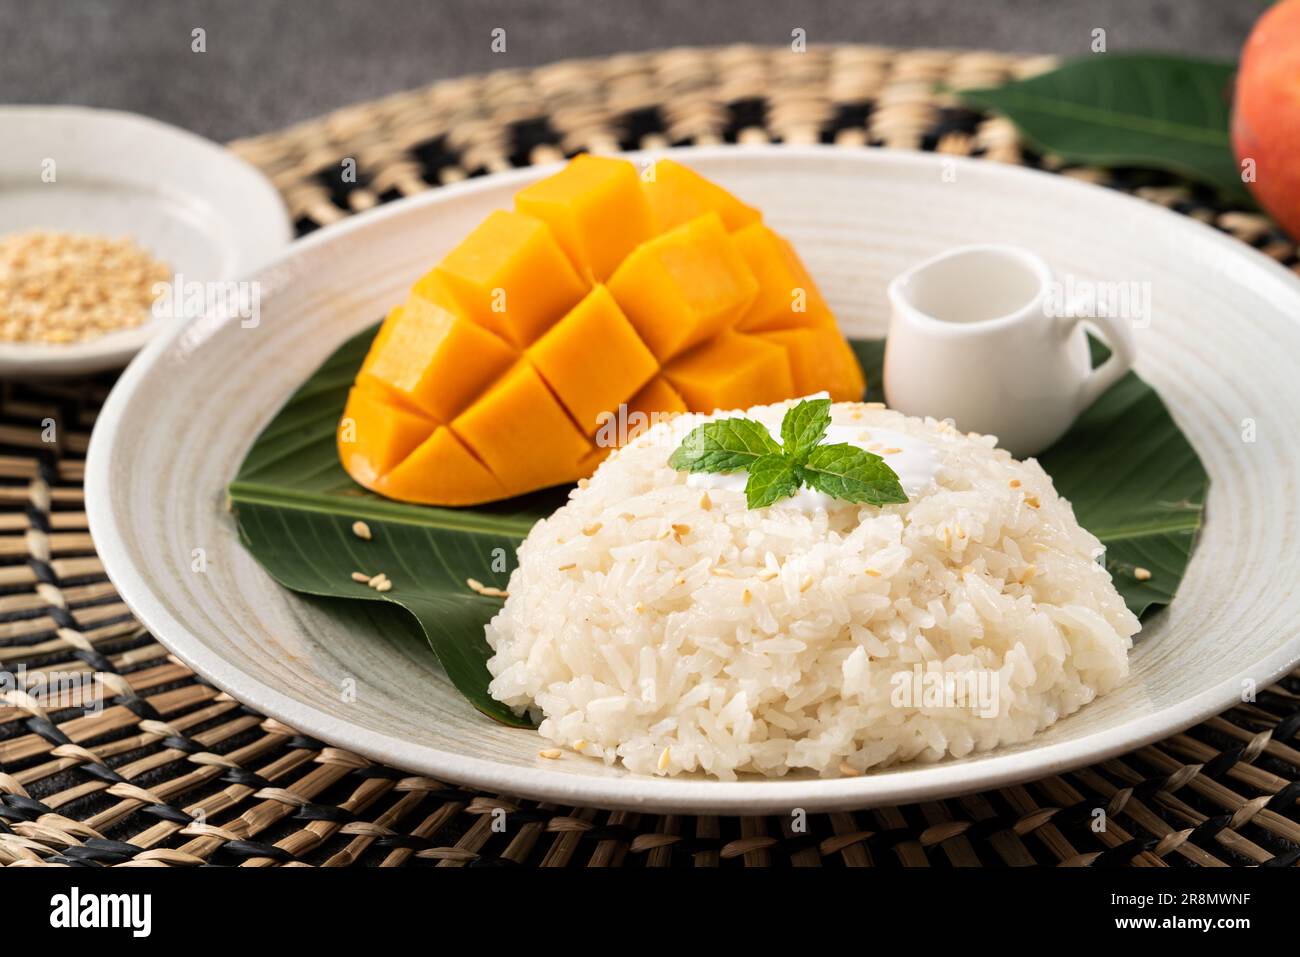 Delicious Thai mango sticky rice with cut fresh mango fruit in a plate on gray table background. Stock Photo